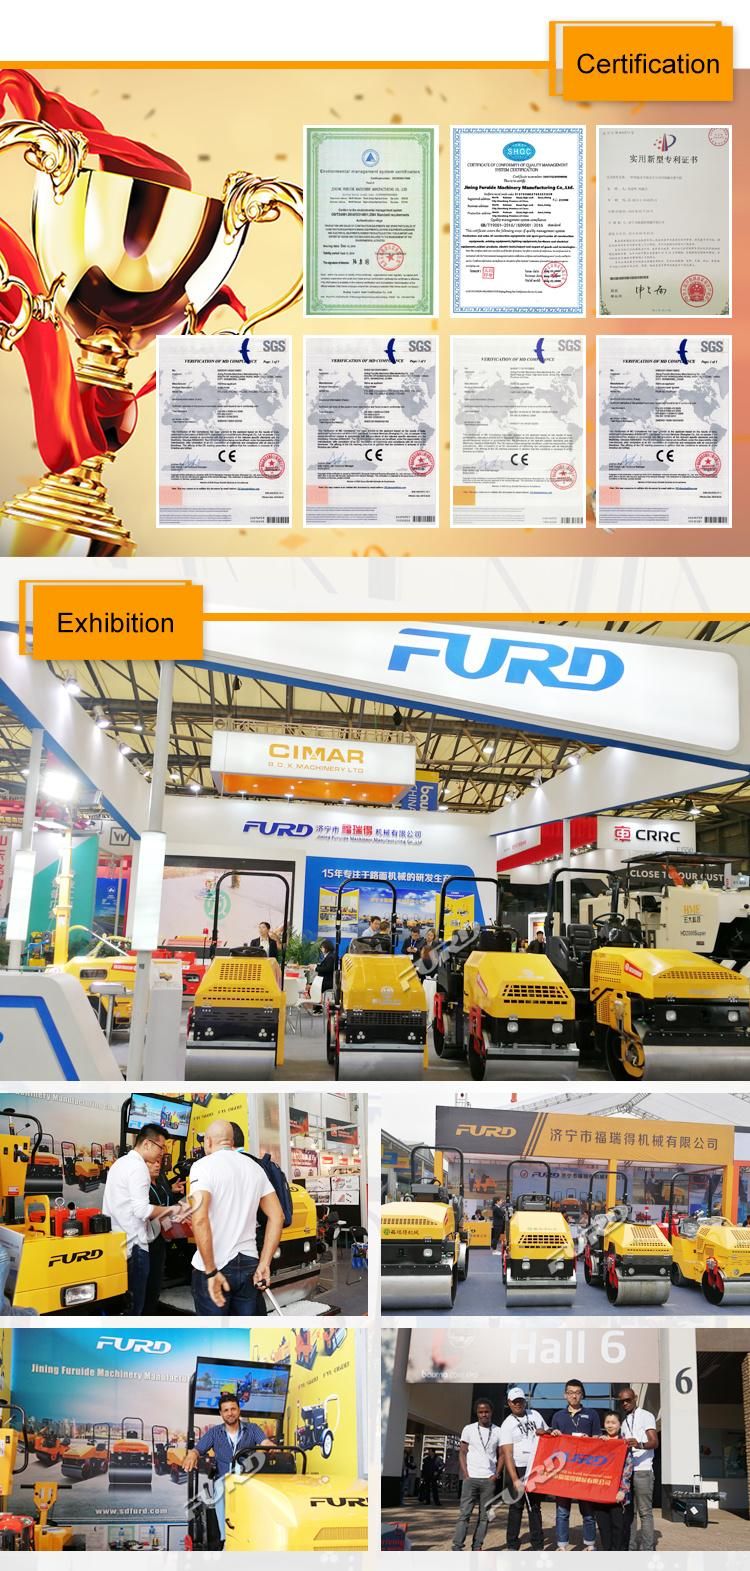 Hydraulic Double Drum Vibratory Roller Soil Roller Compactor Tandem Vibratory Roller Fyl-1400